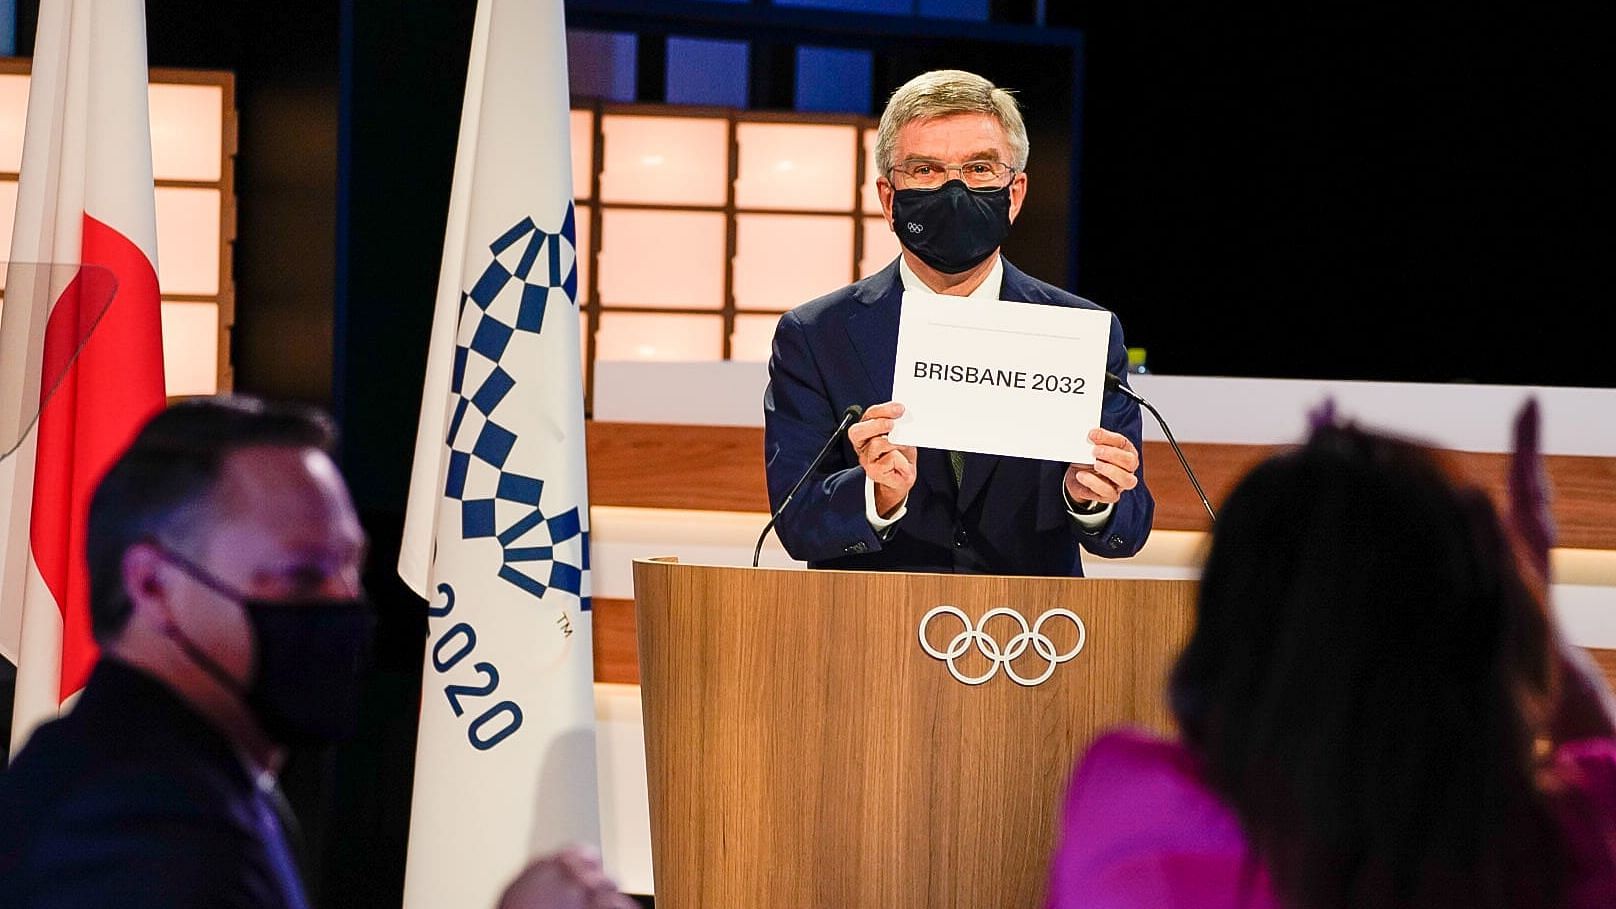 <div class="paragraphs"><p>Thomas Bach announces the hosts of the 2032 Summer Olympic Games.</p></div>